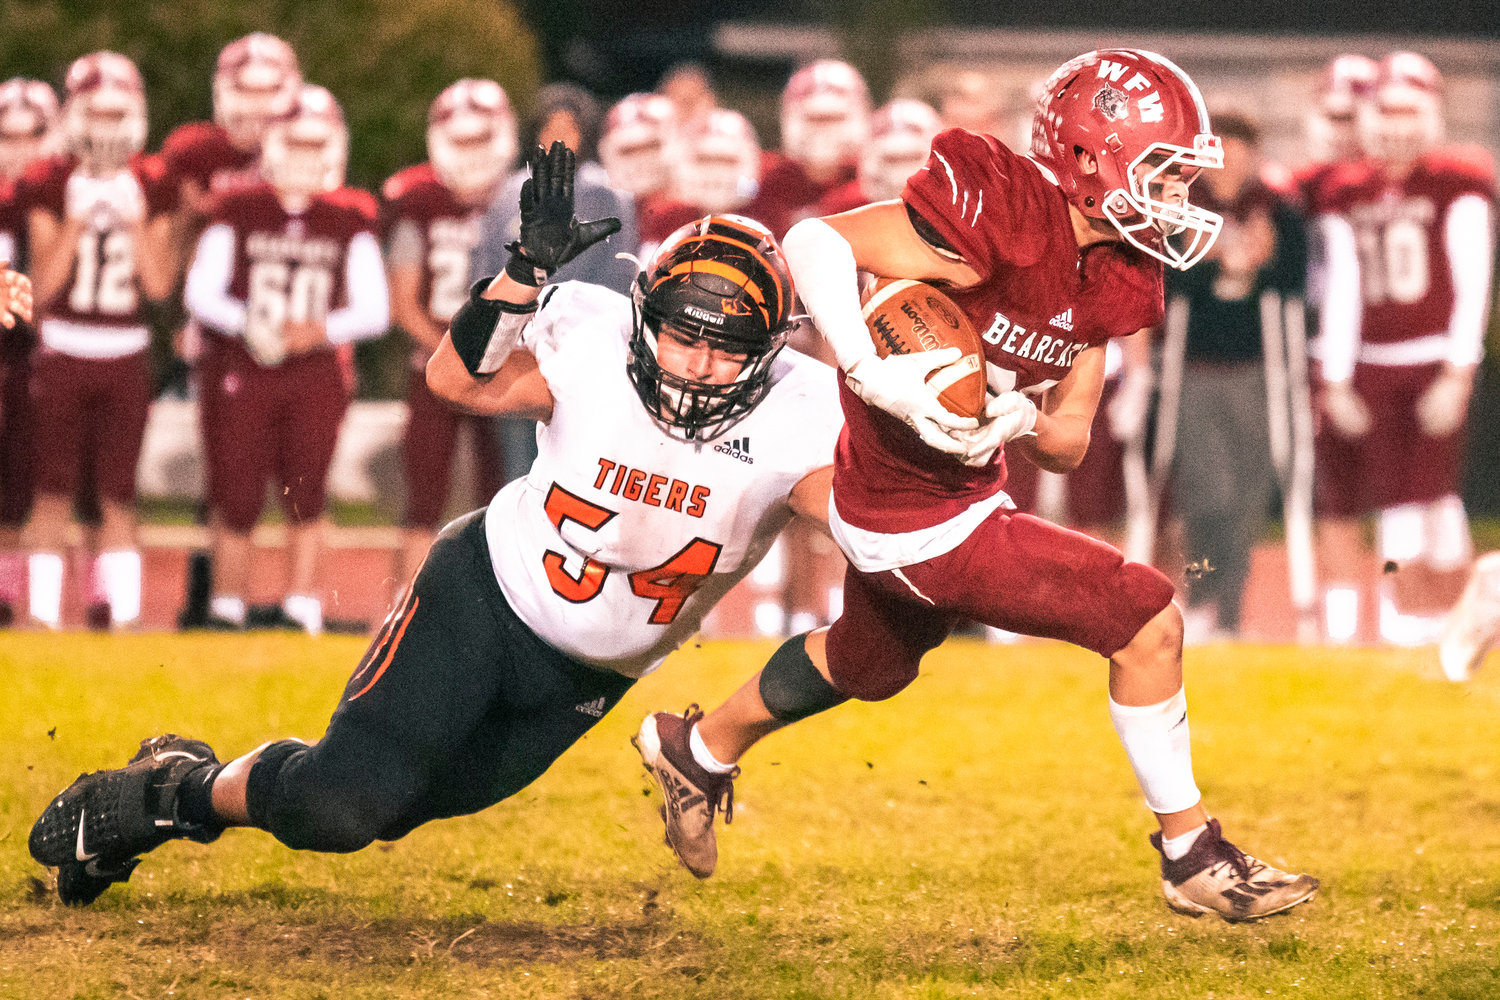 Centralia’s Isaiah Vasquez (54) dives for W.F. West’s Evan Stajduhar (23) as he runs by with the football Friday night during the Swamp Cup rivalry match at Bearcat Stadium.